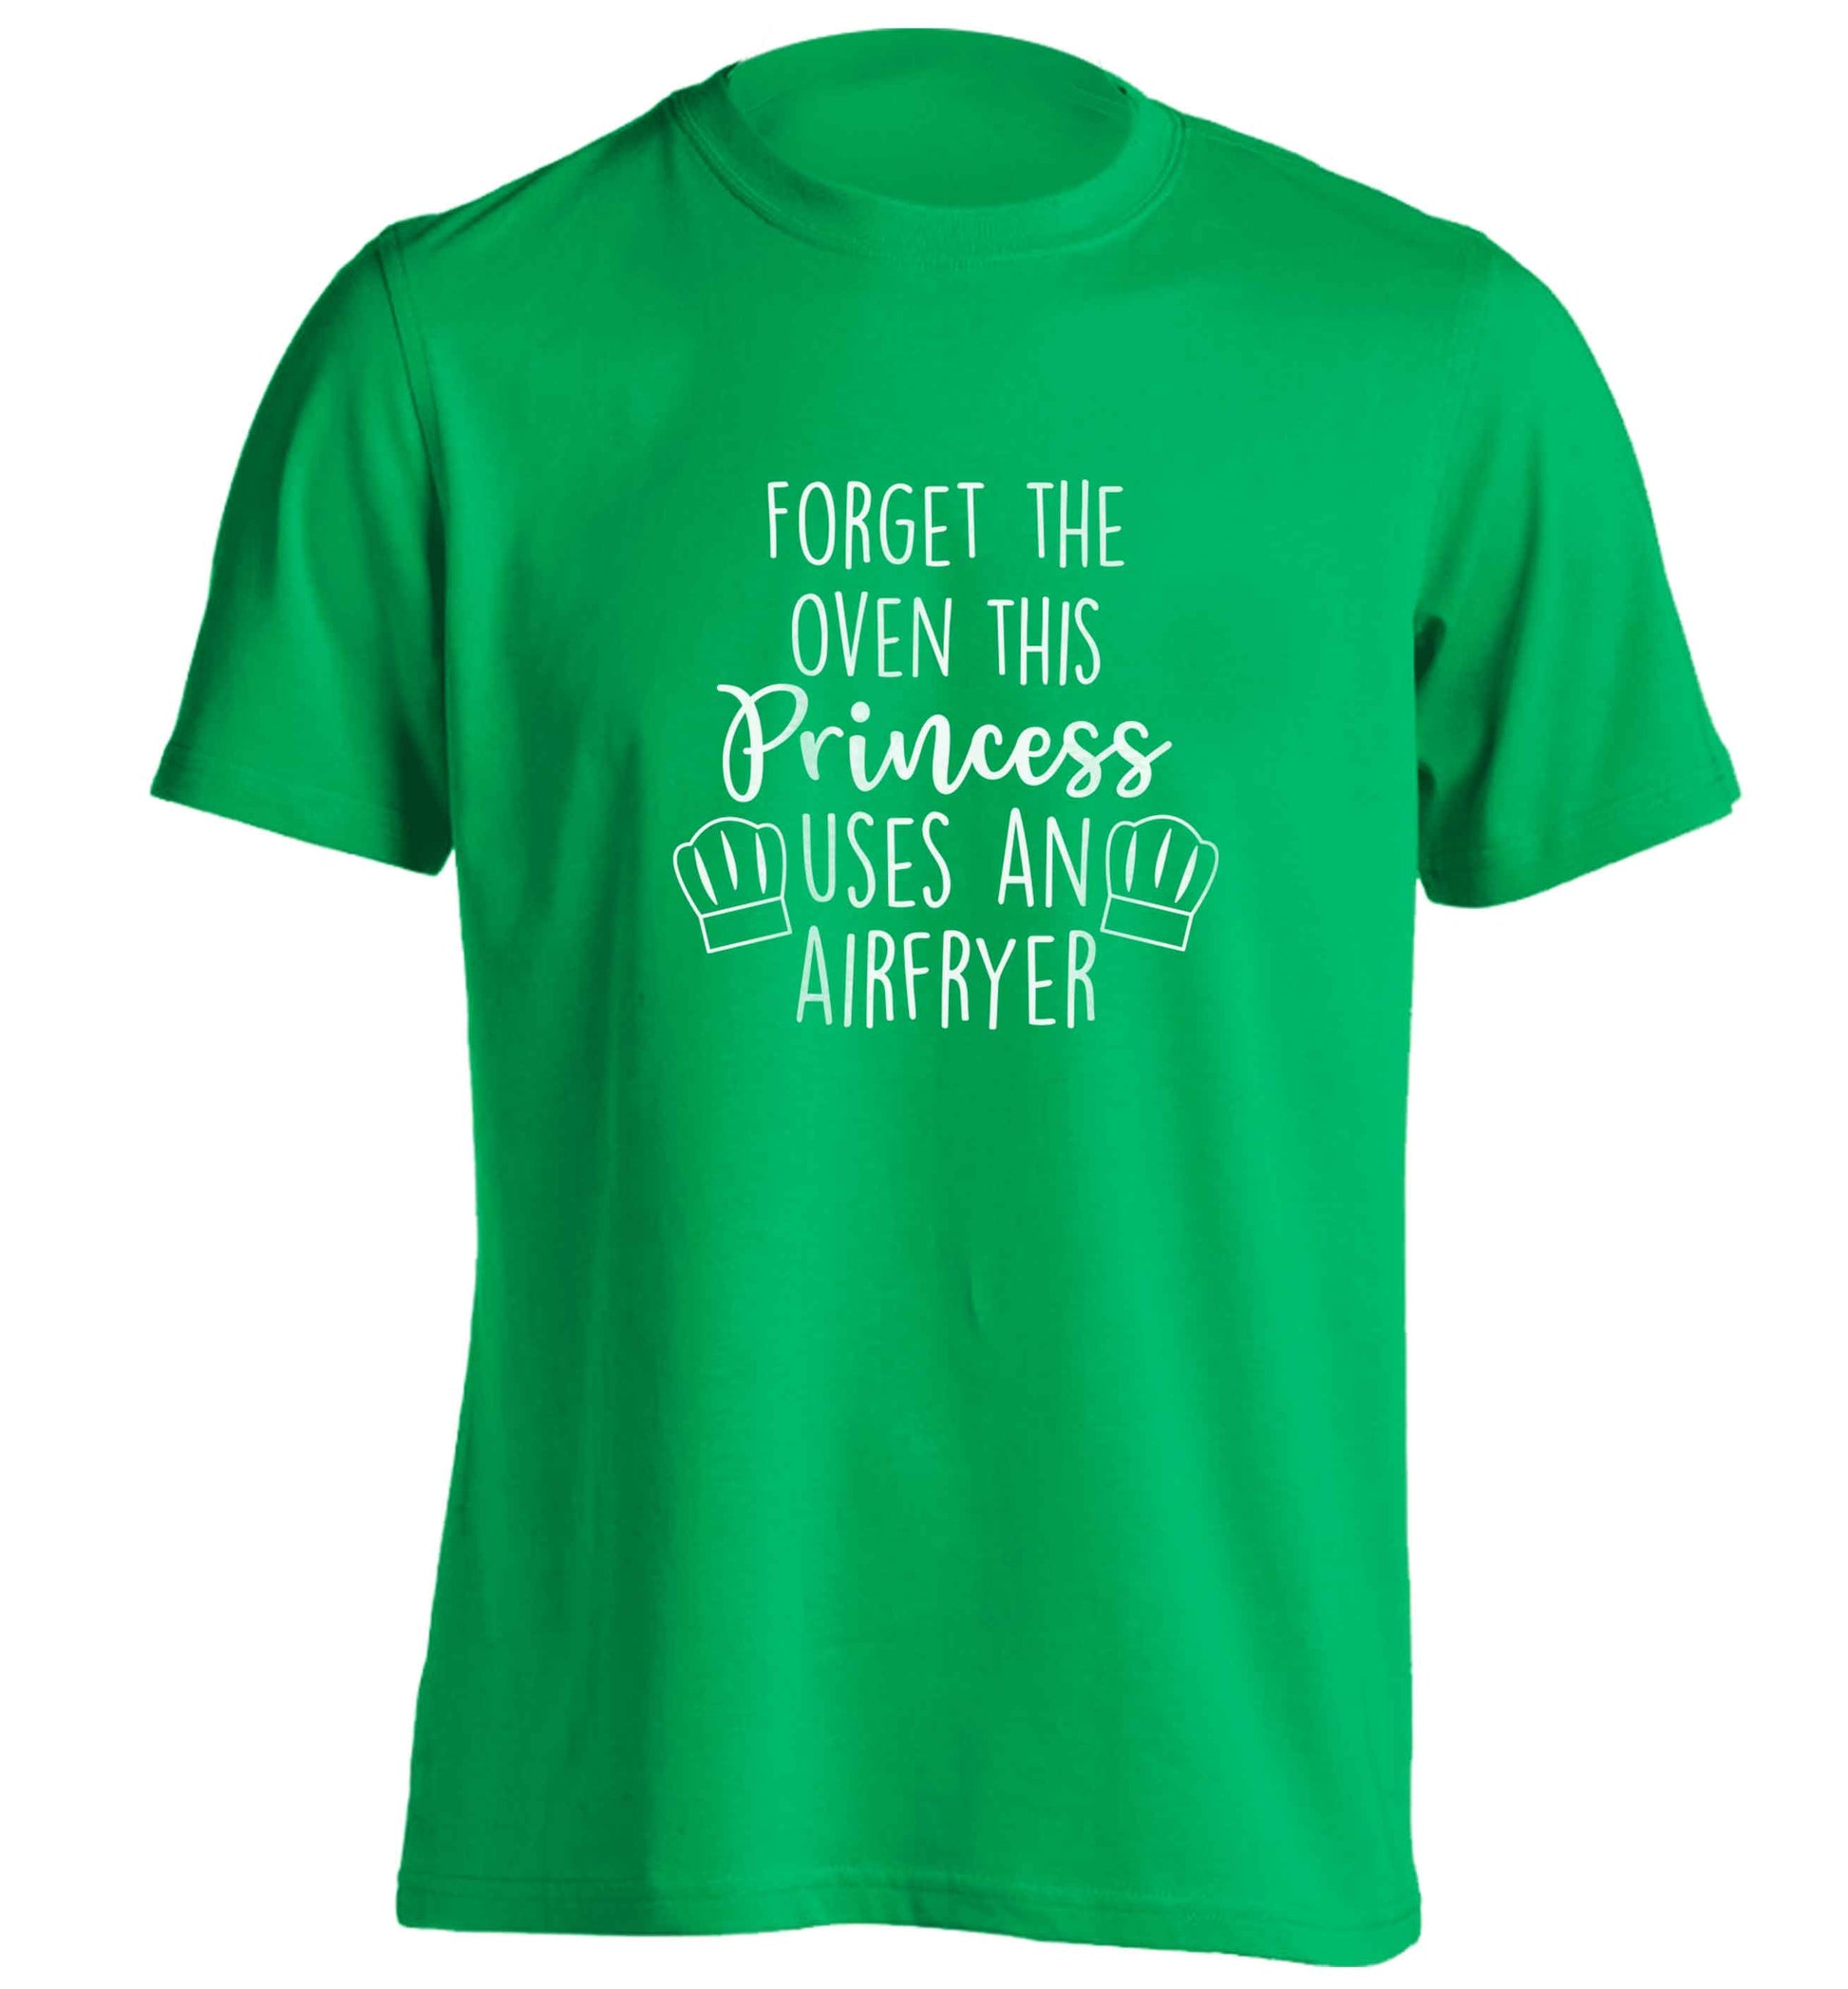 Forget the oven this princess uses an airfryeradults unisex green Tshirt 2XL